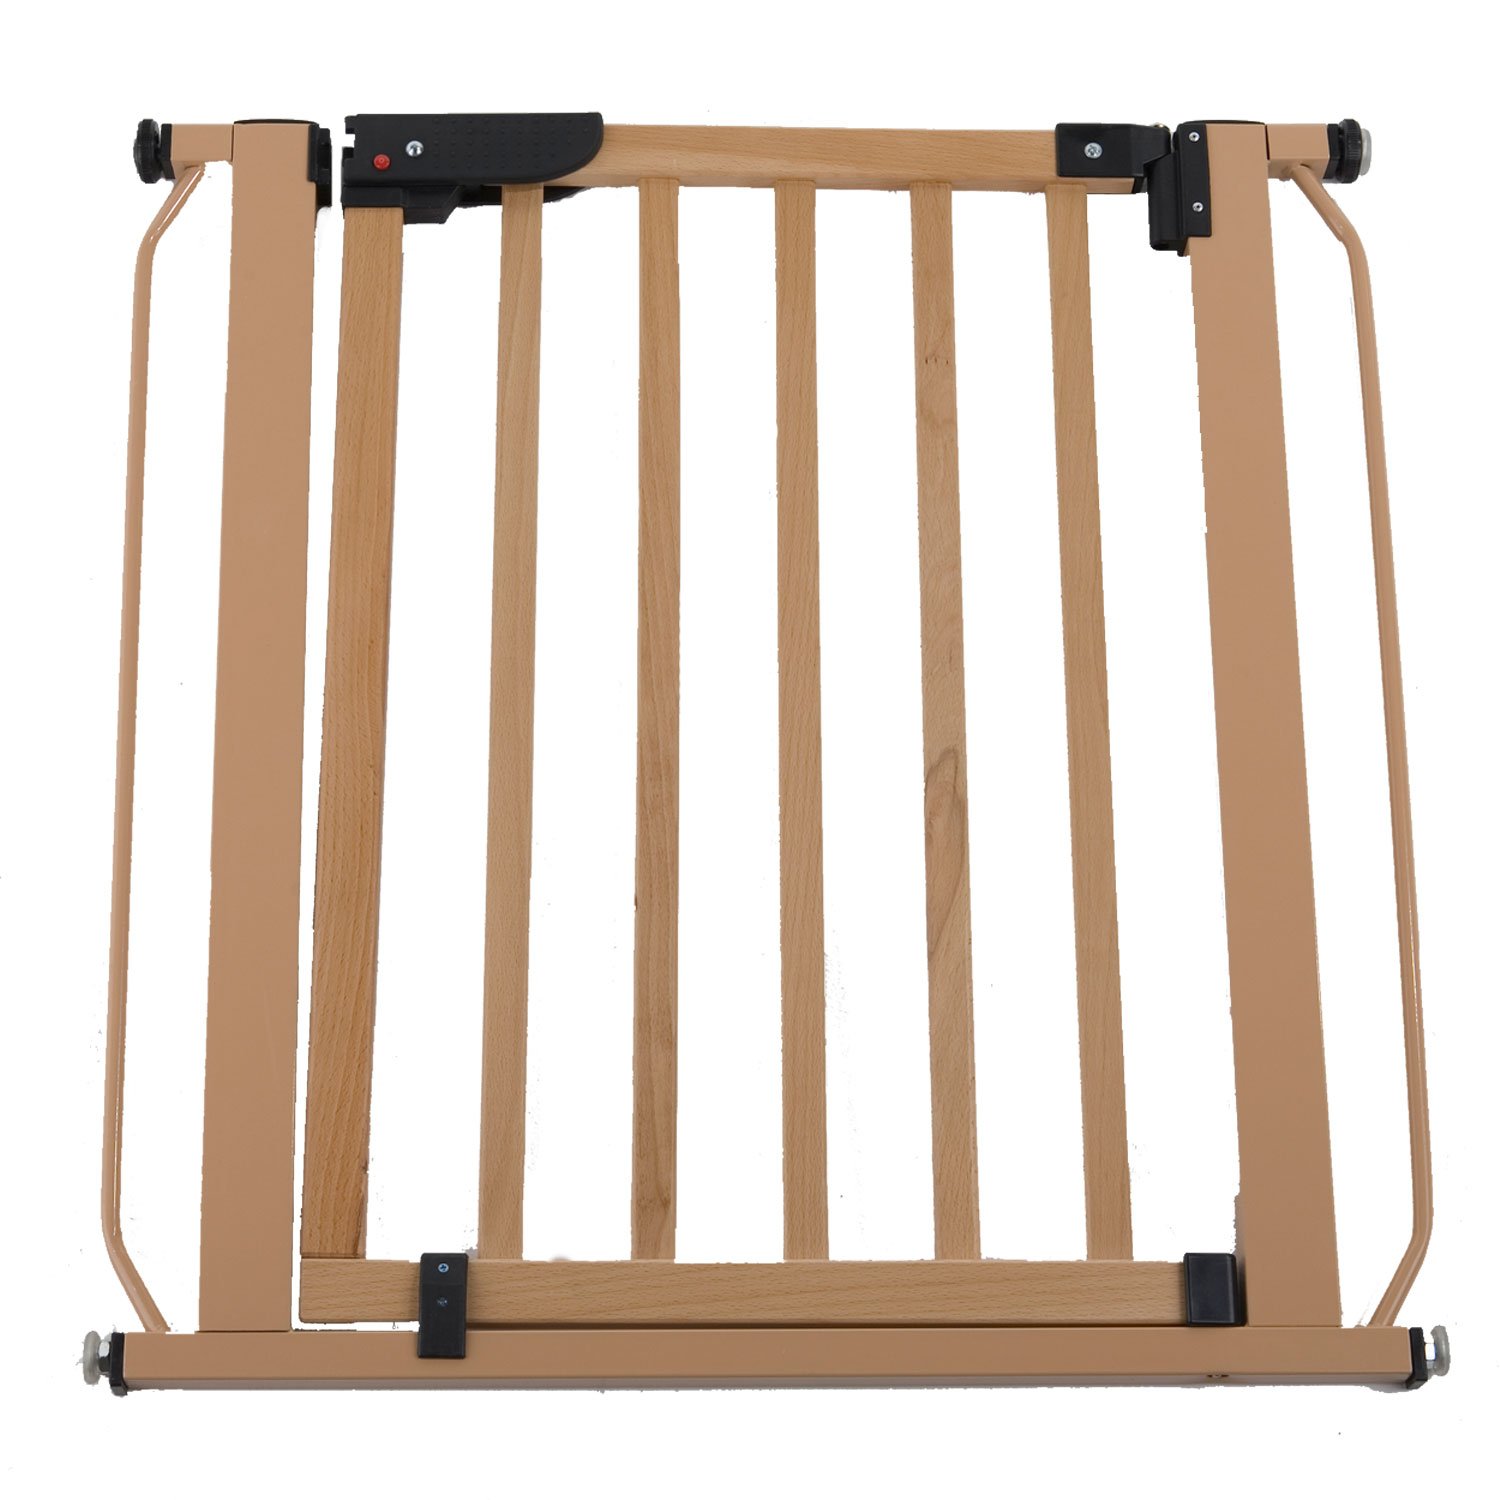 UPC 635035001021 product image for Cardinal Gates Wood Auto-Lock Pressure Pet Gate (Adjustable From 29